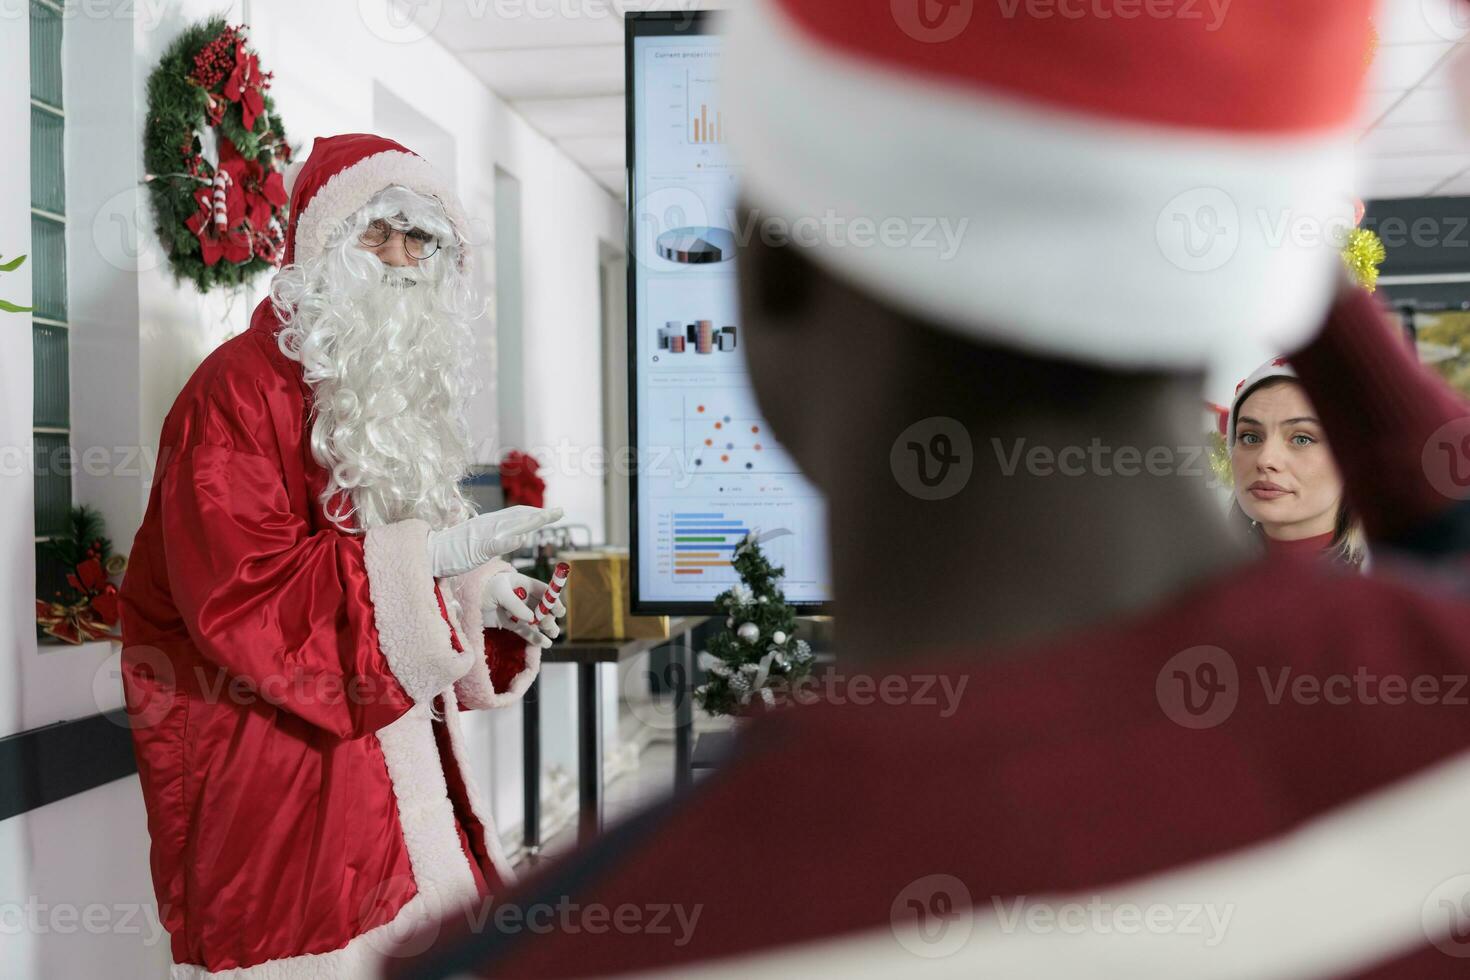 Public speaker dressed as Santa Claus inspiring employees to advance their careers in festive decorated office. Coworking meeting attendees learning important industry skills during holiday season photo